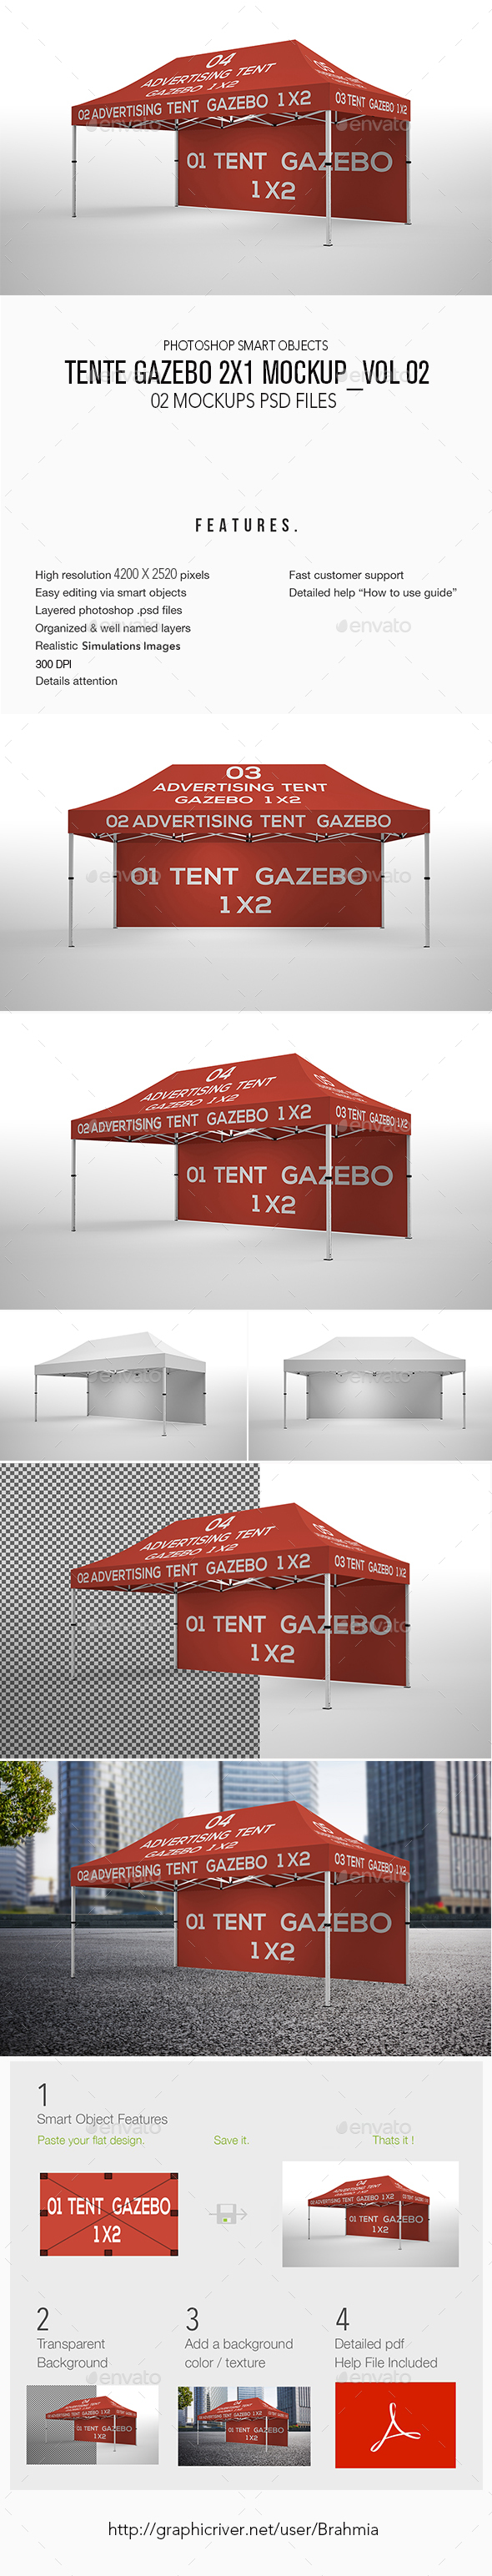 Free Gazebo Mockup Psd - Pin Di Design Templates / Best free packaging mockups from the trusted ...